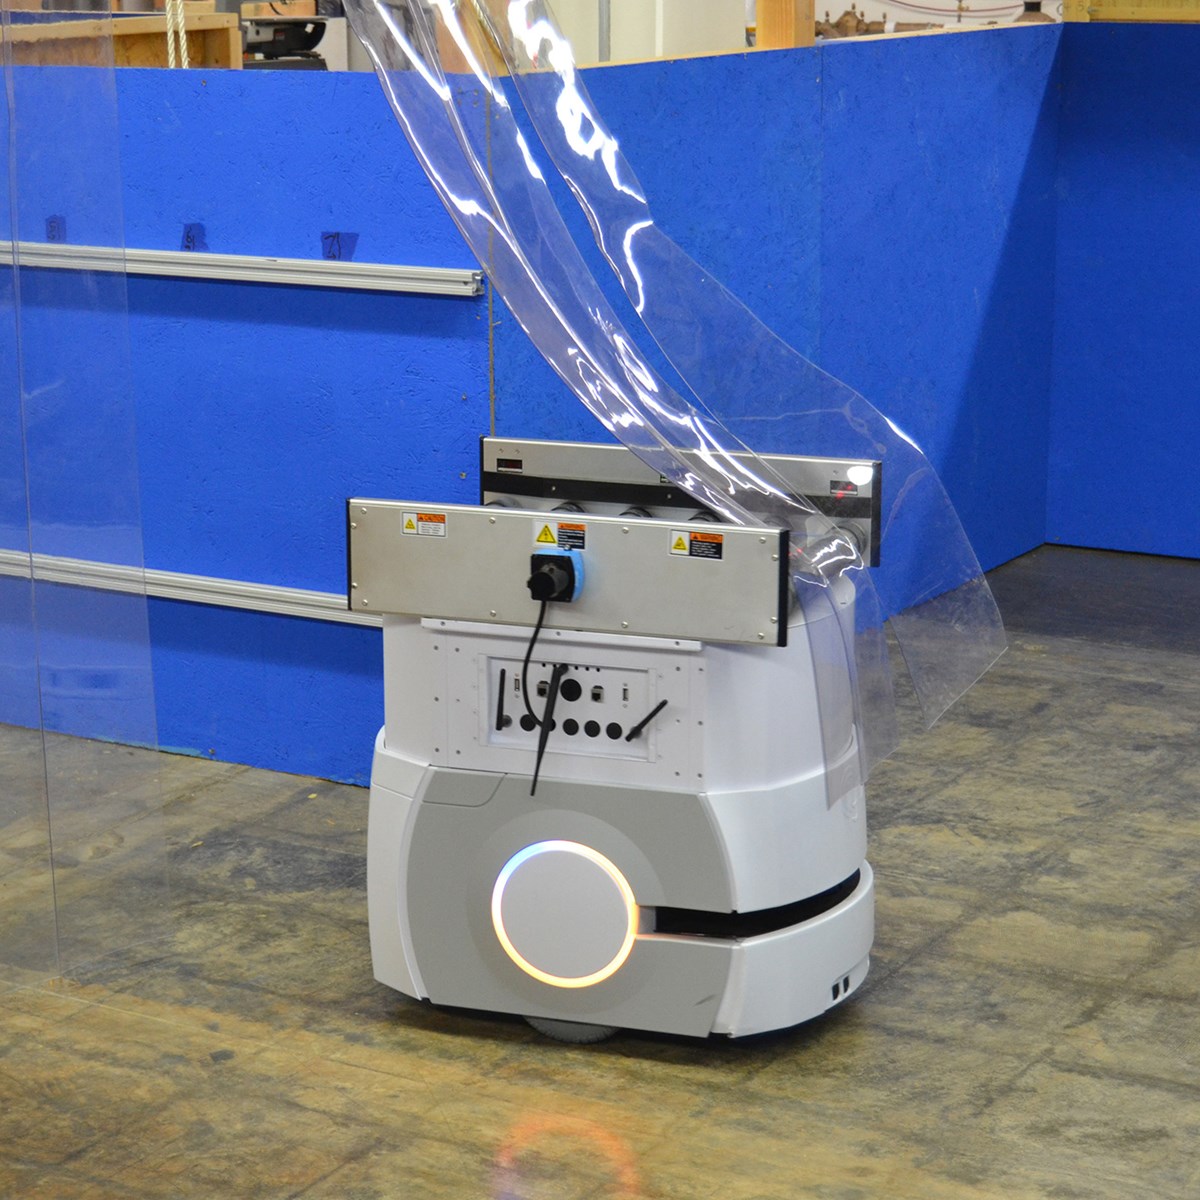 Omron Adept Lynx robot navigates through a test apparatus for soft partitions.